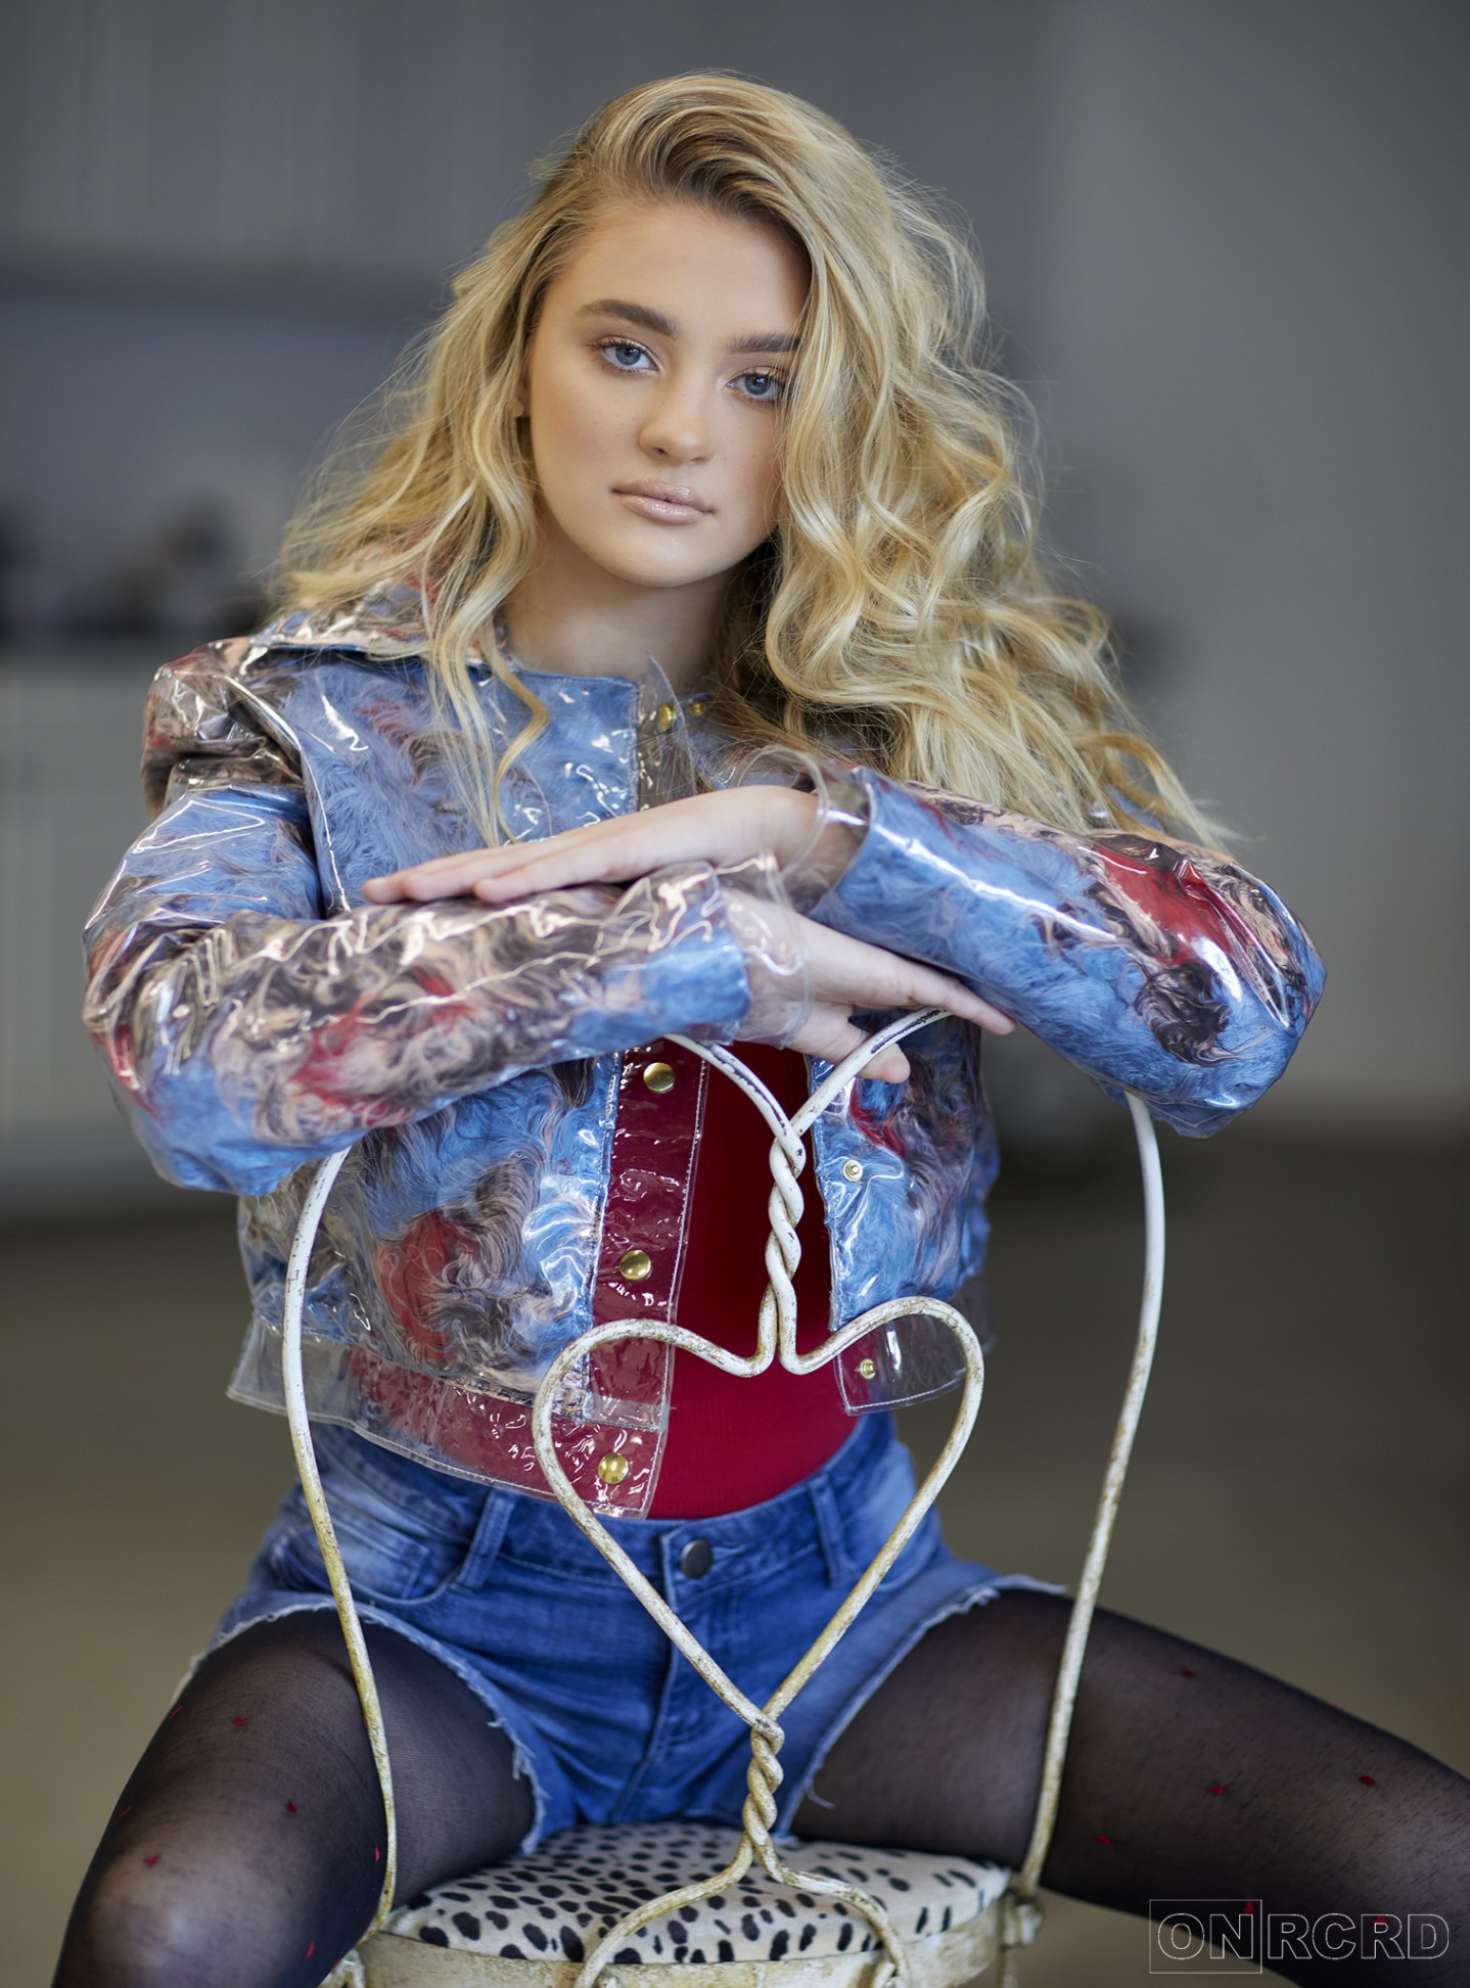 Lizzy Greene 2018 : Lizzy Greene by Mario Barberio for ONRCRD 2018 -06. 